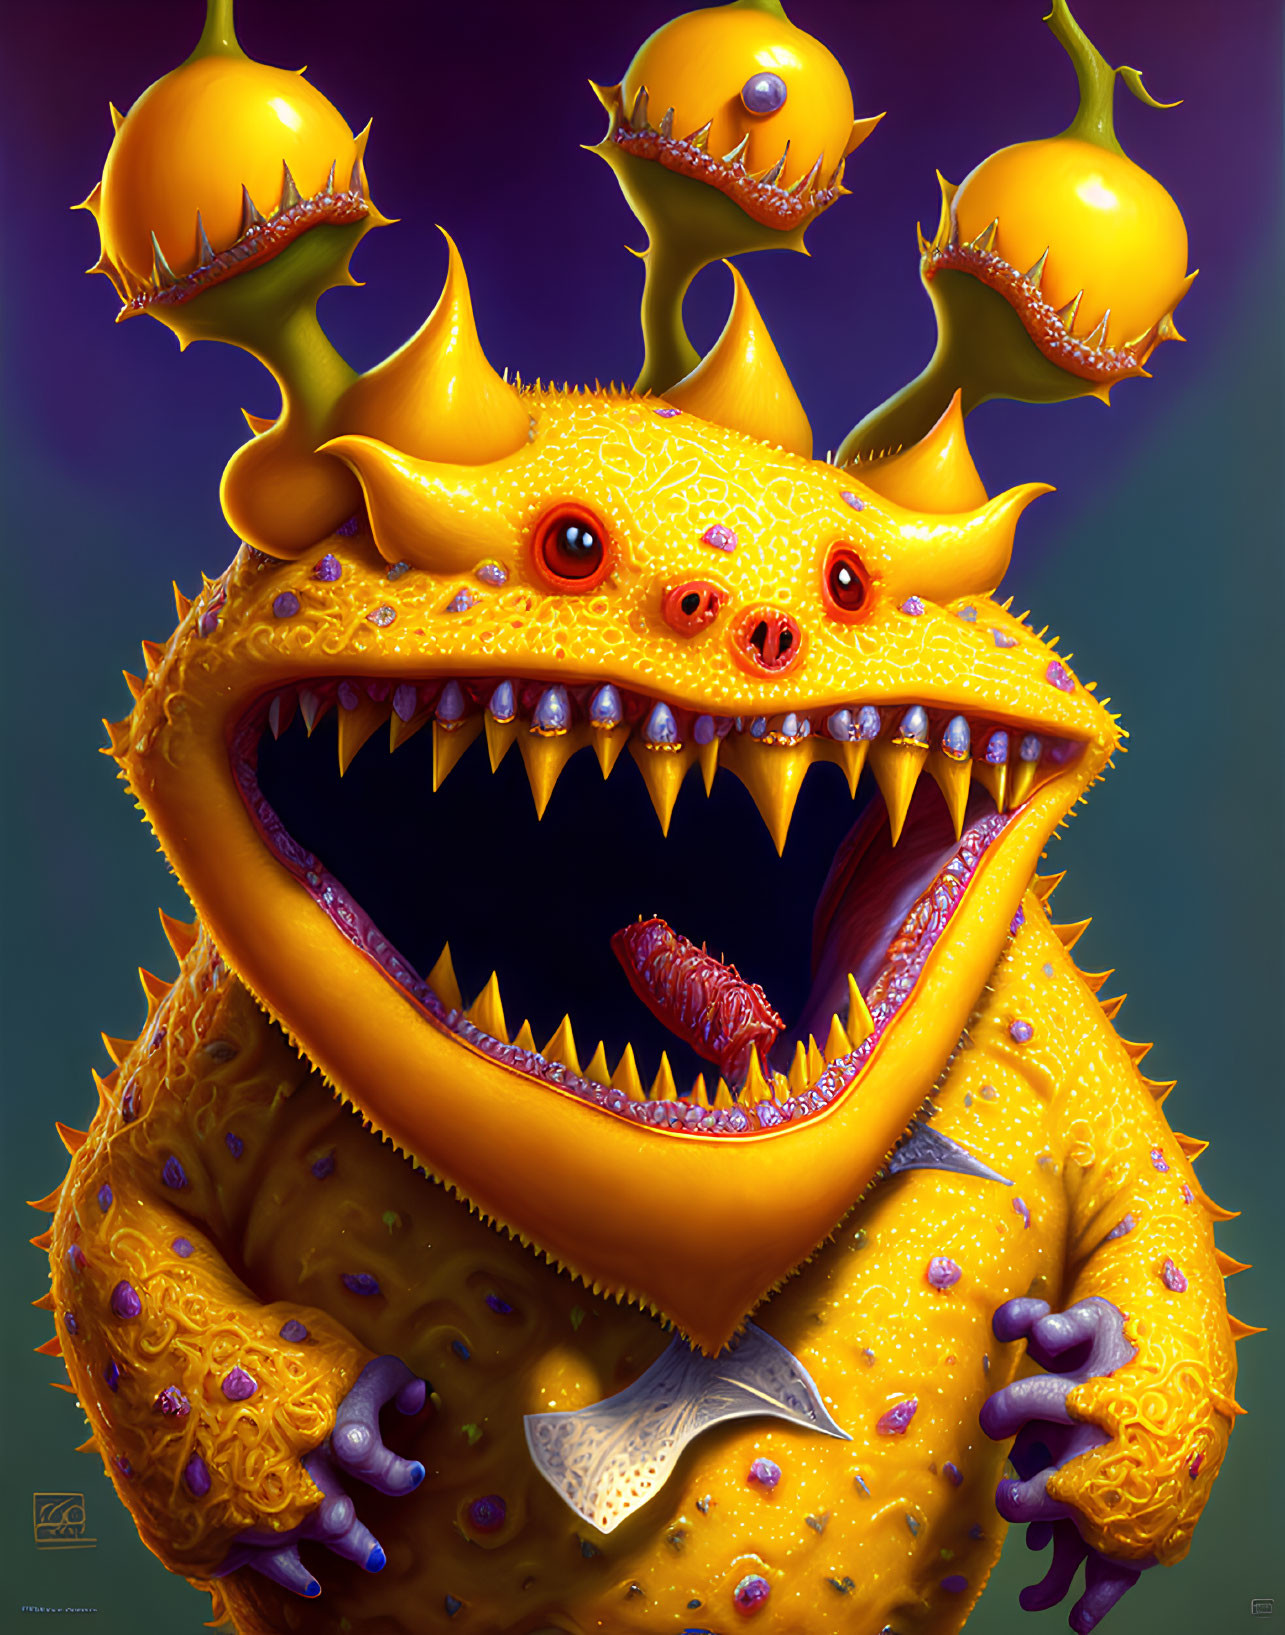 Colorful Monster Illustration with Multiple Eyes and Sharp Teeth